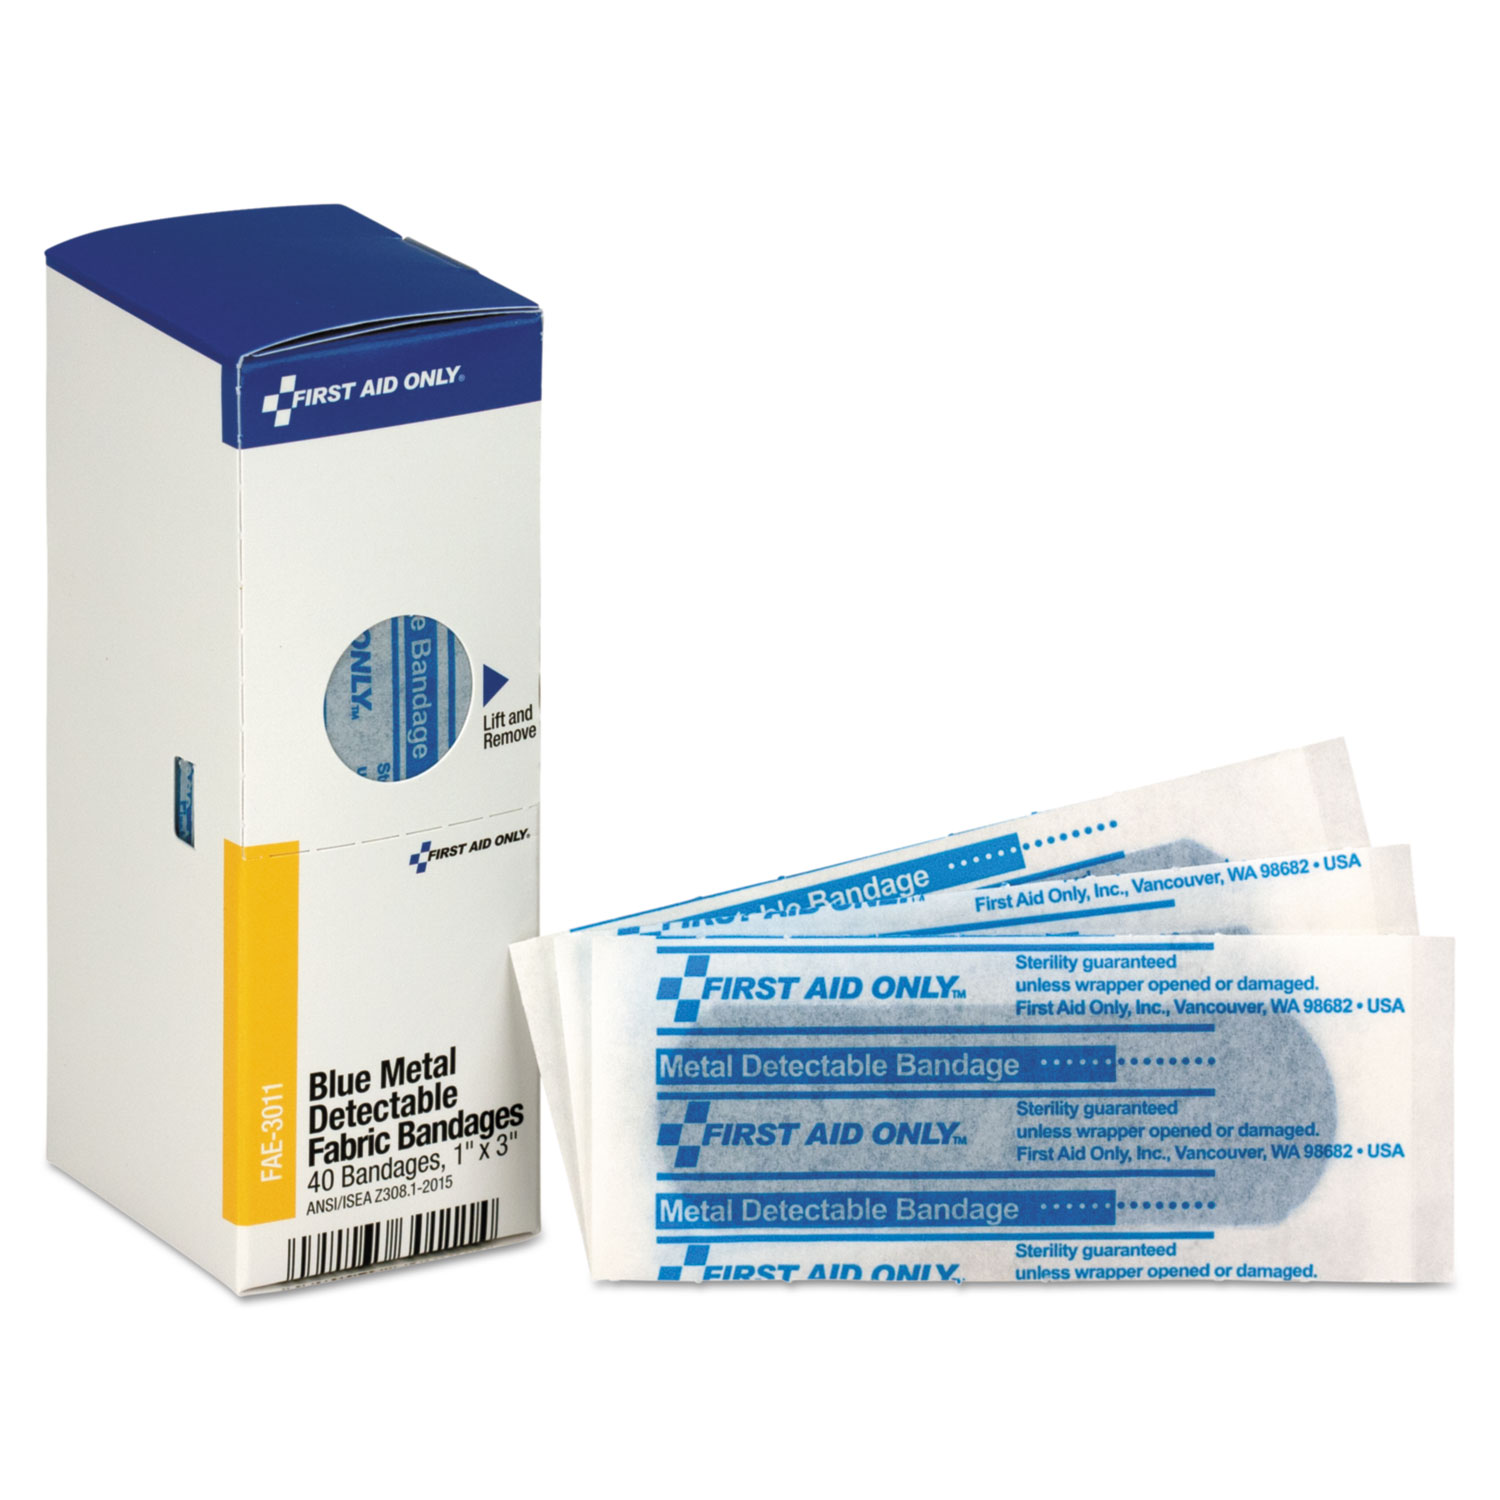  First Aid Only FAE-3011 Refill f/SmartCompliance Gen Cabinet, Blue Metal Detectable Bandages,1x3,40/Bx (FAOFAE3011) 